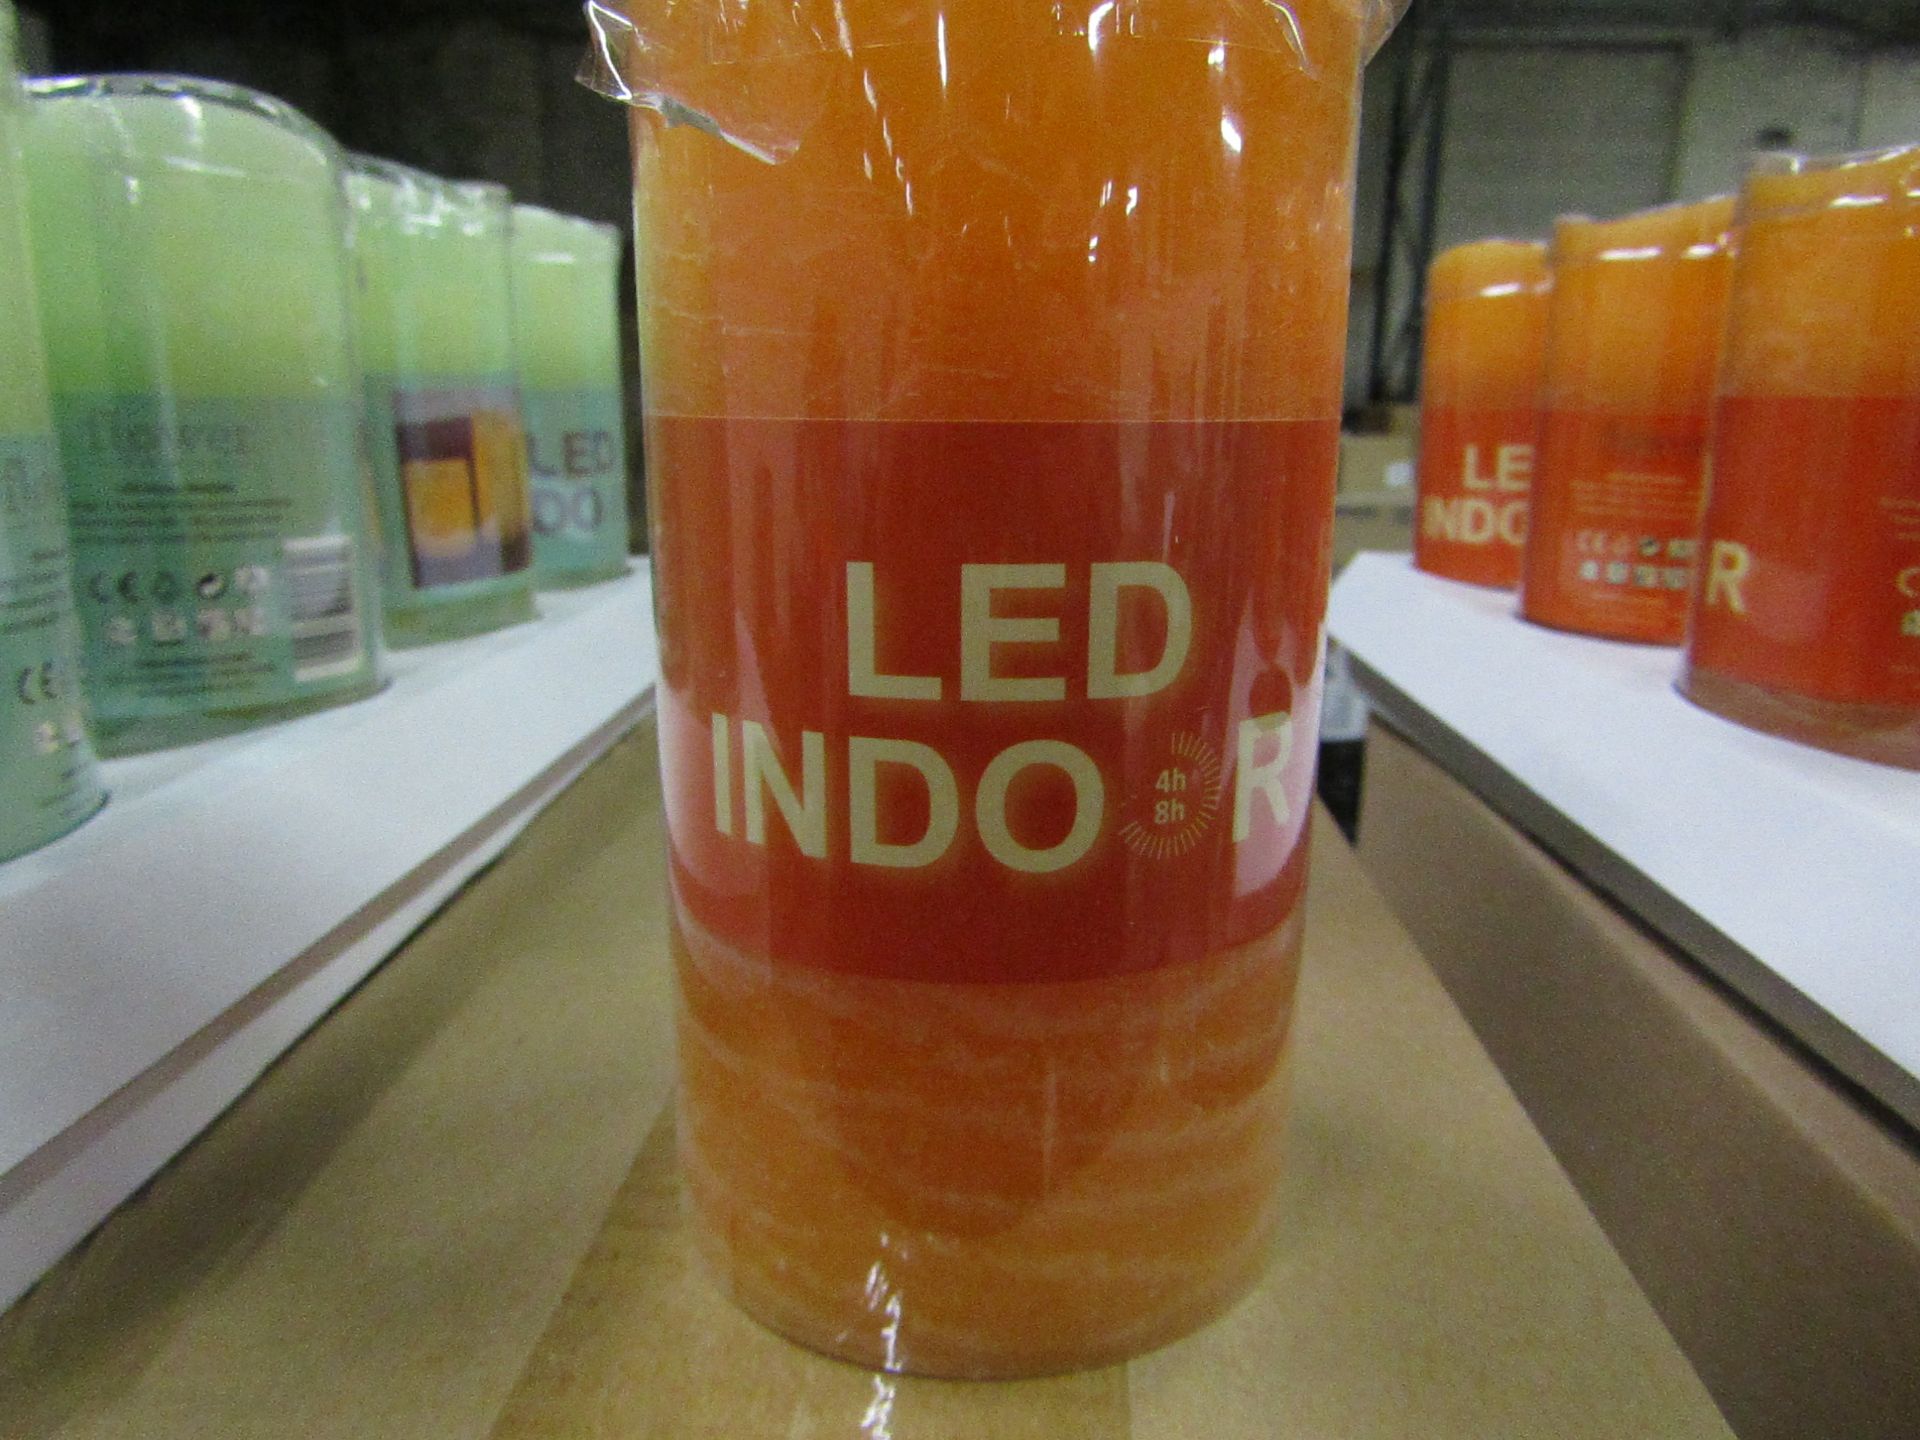 8x Orange LED Indoor Artificial Candles (With Timer Mode 4/8 Hrs) Battery Operated - New & Boxed.